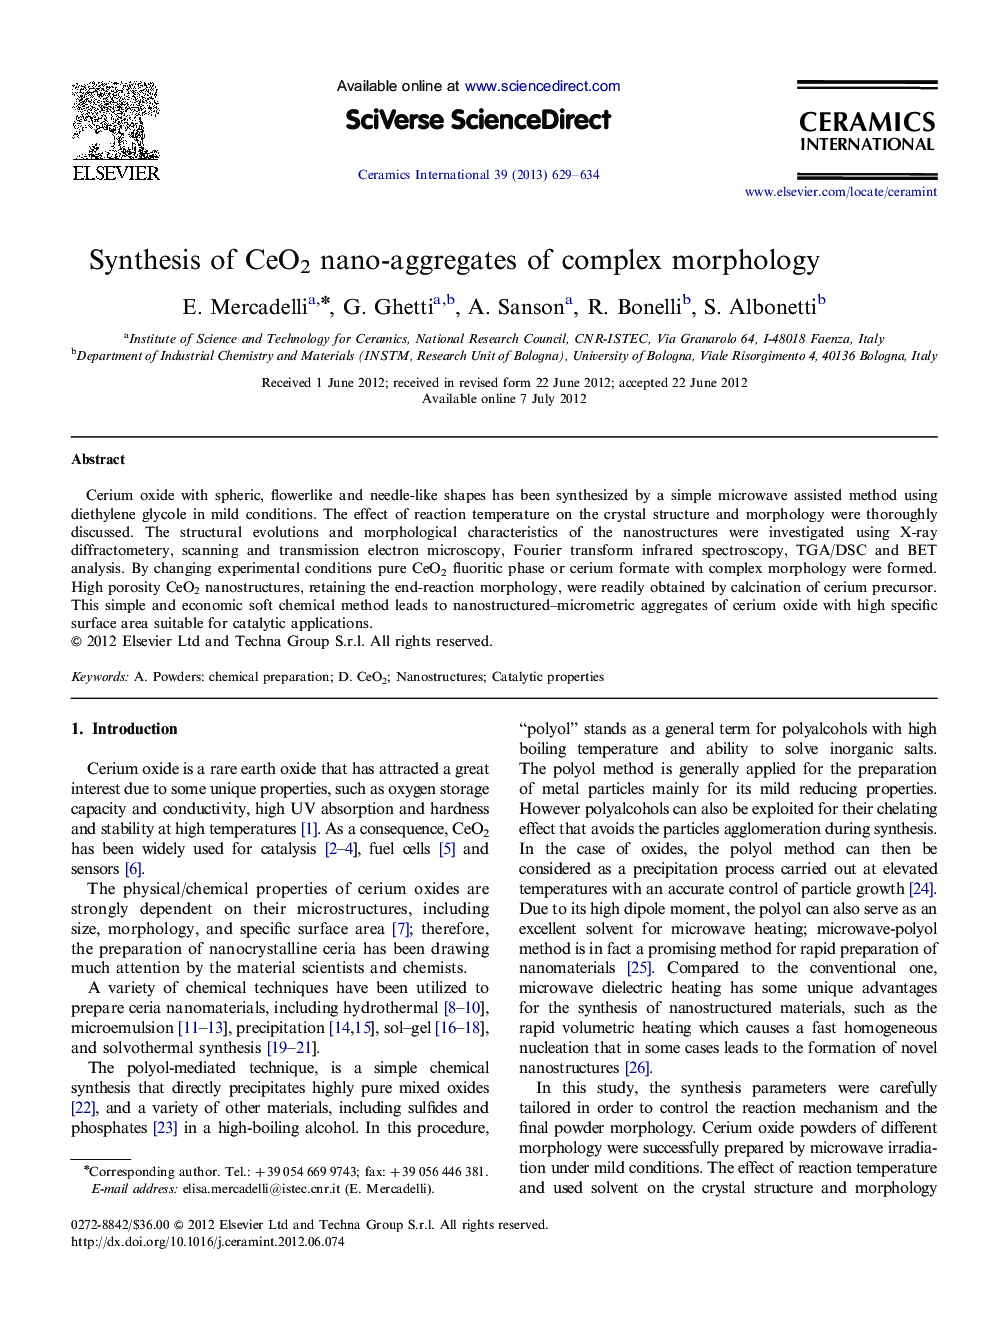 Synthesis of CeO2 nano-aggregates of complex morphology